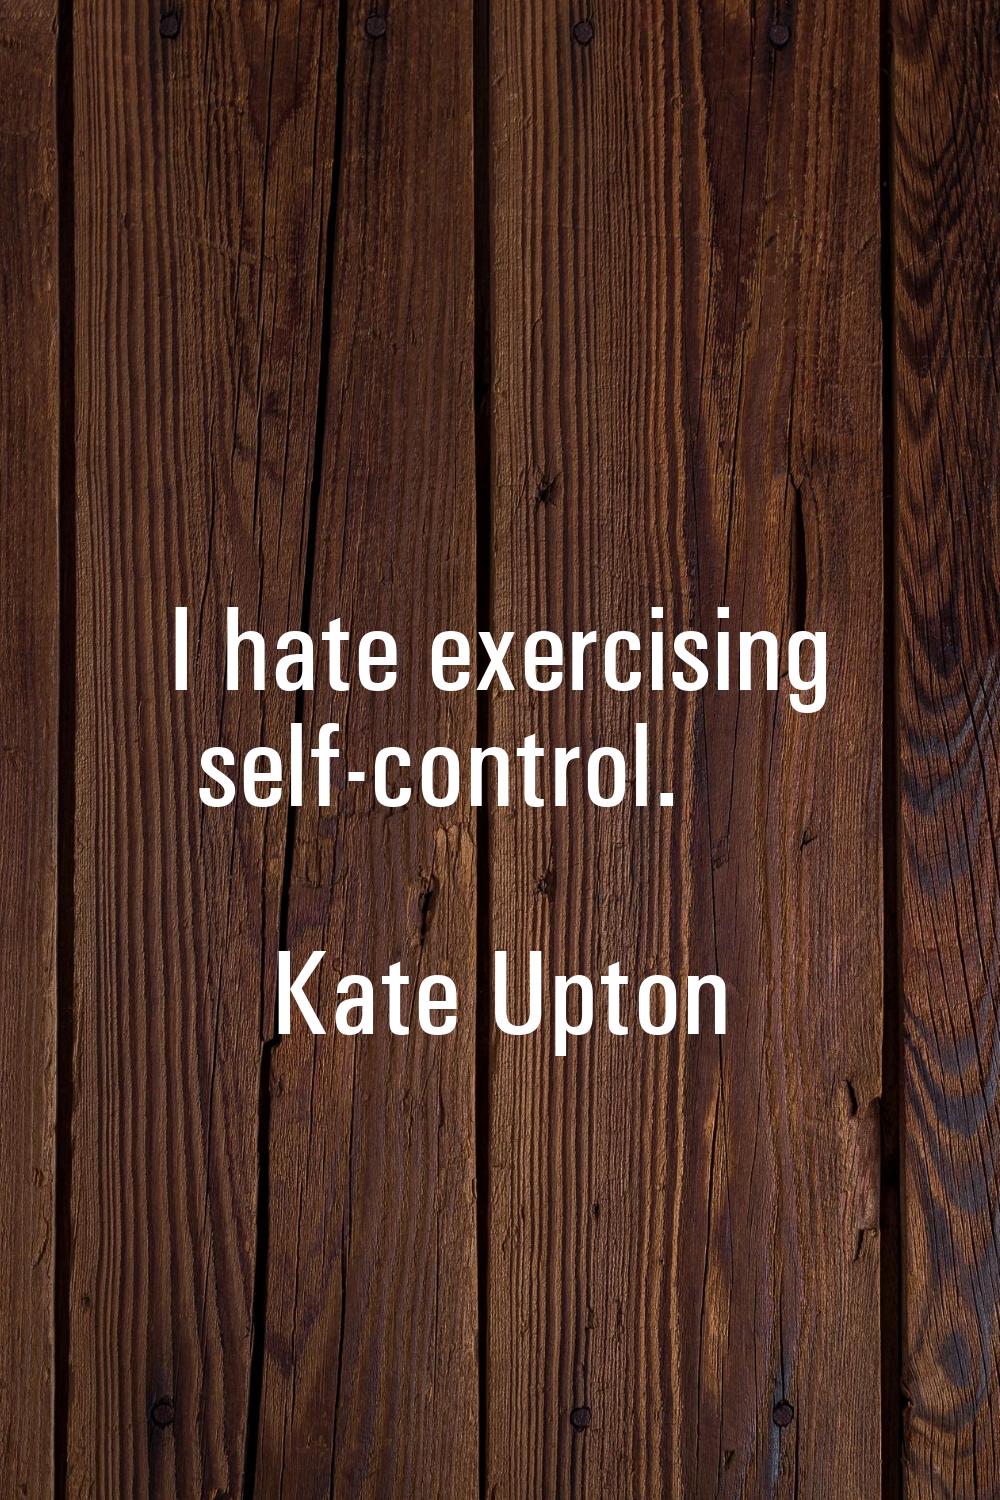 I hate exercising self-control.